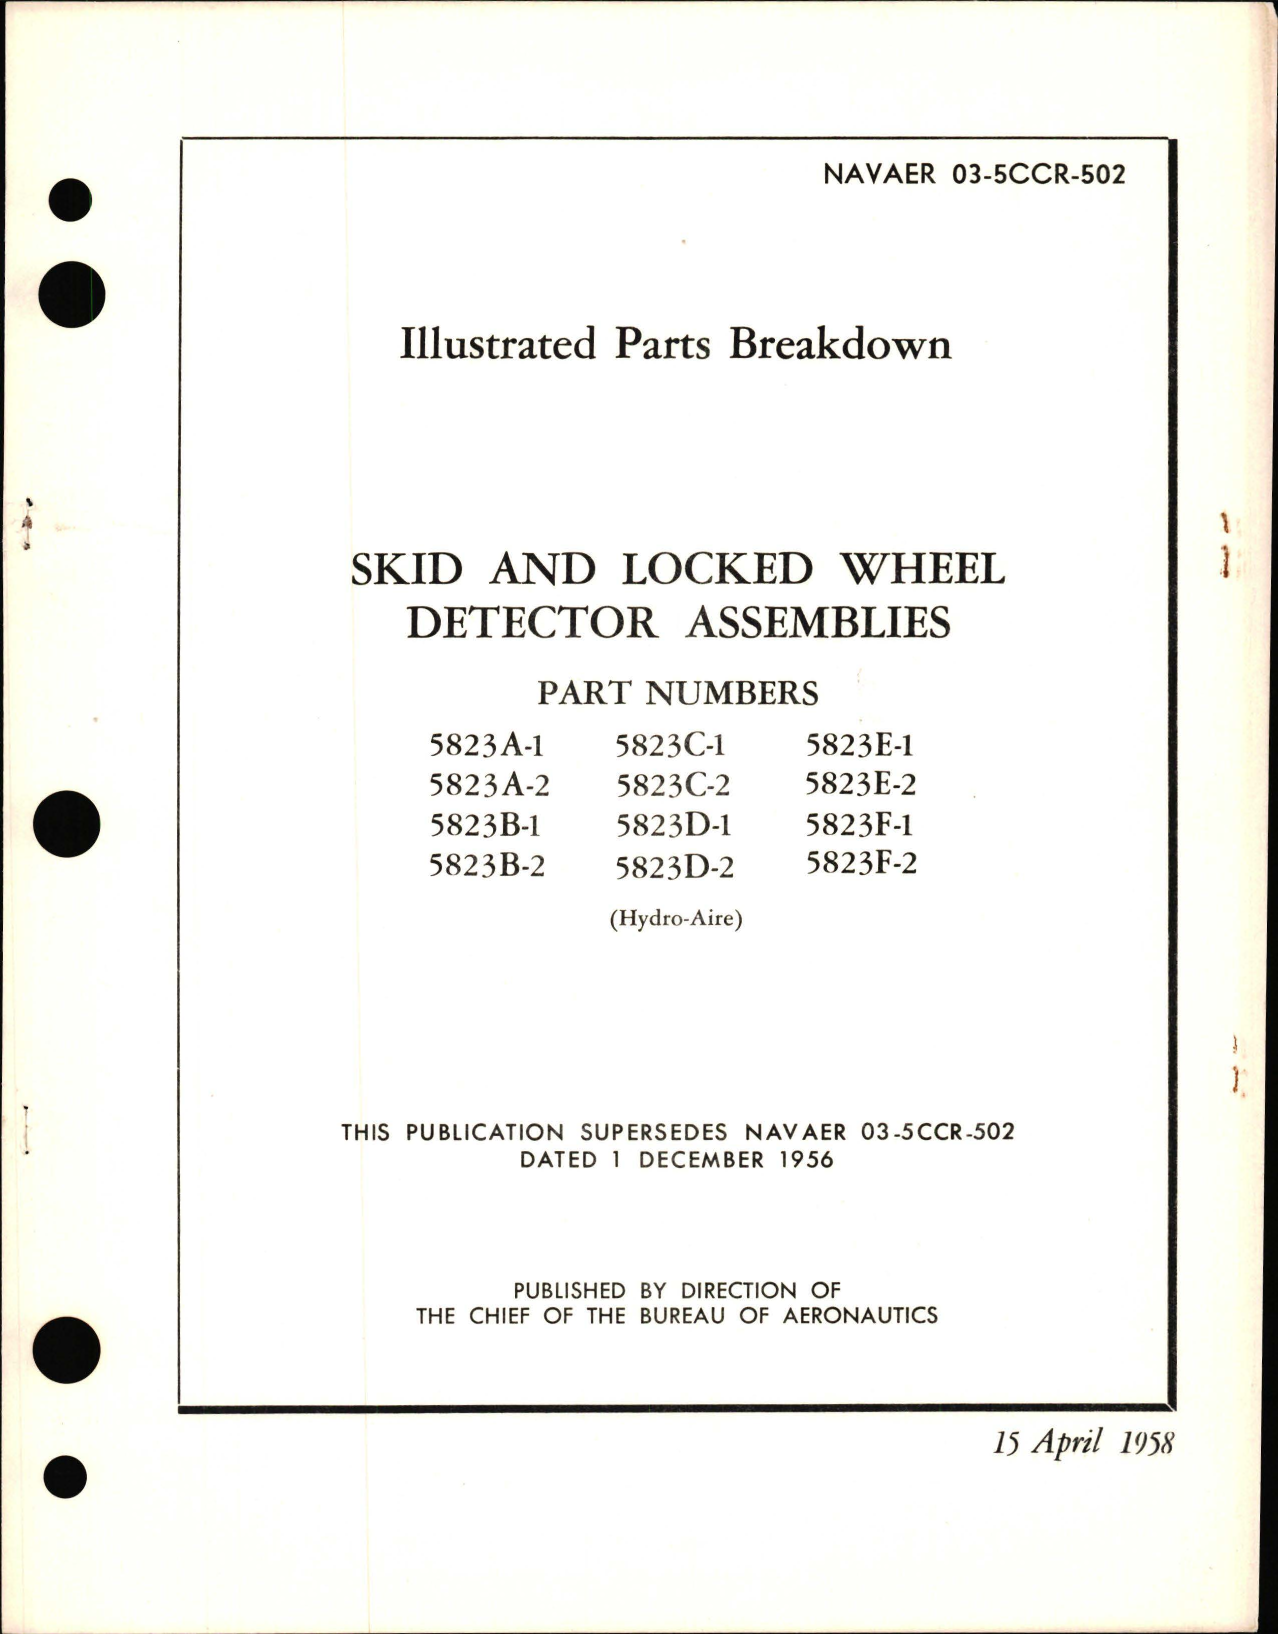 Sample page 1 from AirCorps Library document: Illustrated Parts Breakdown for Skid and Locked Wheel Detector Assemblies for Part 5823 Series